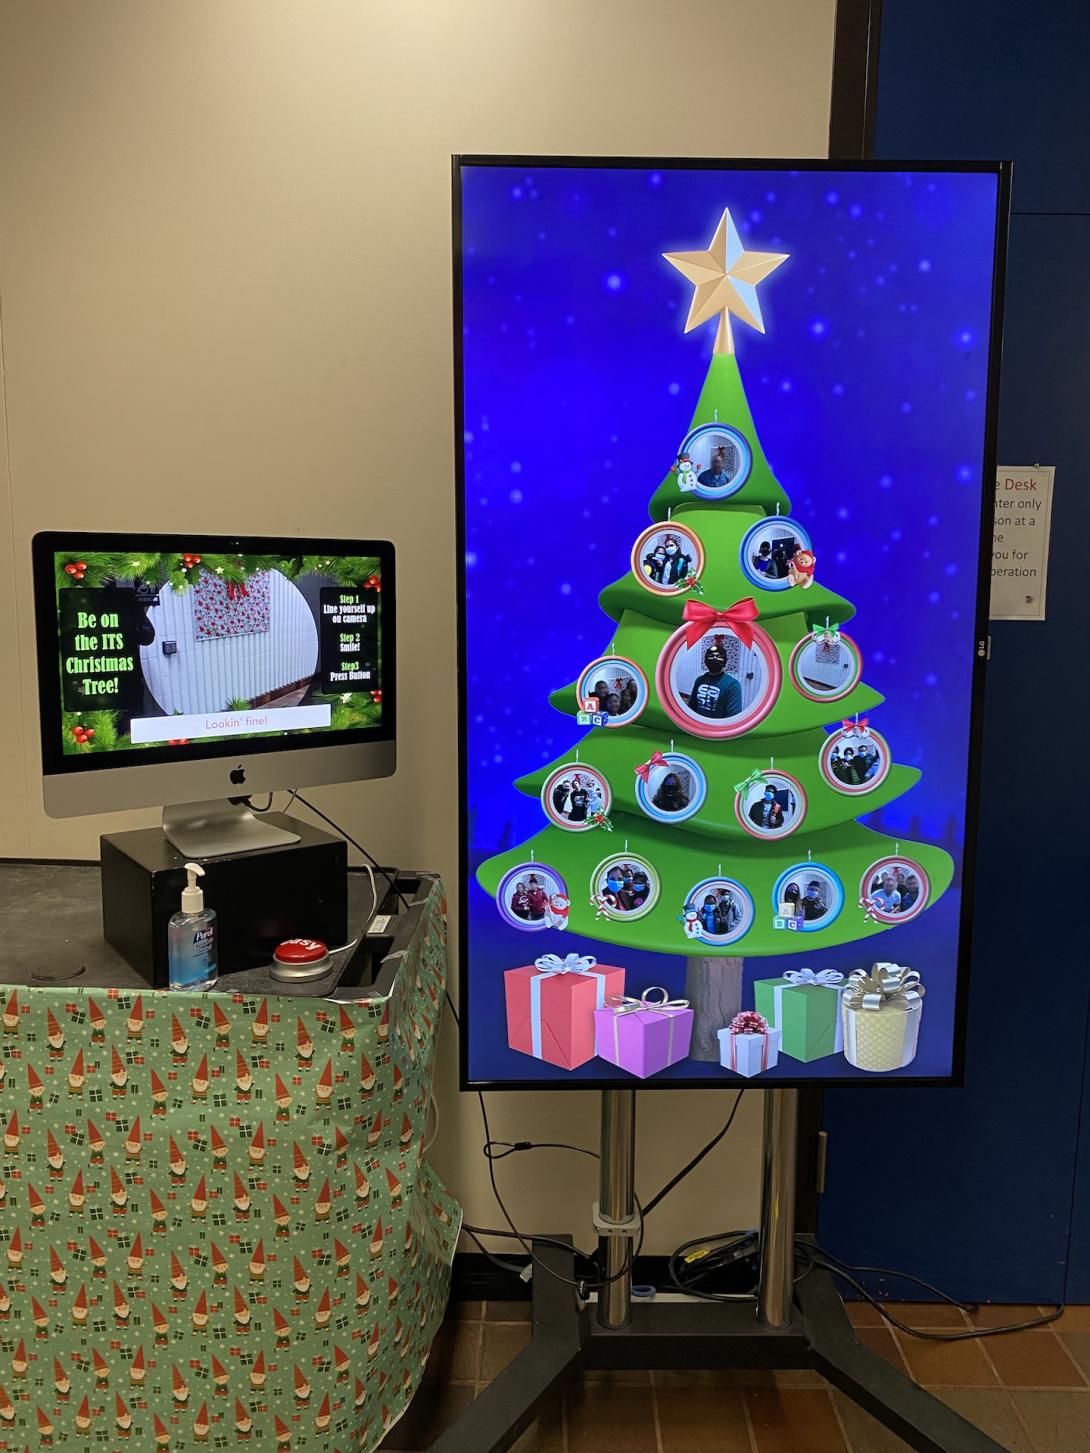 A tall monitor displays a cartoon Christmas tree decorated with circular ornaments containing photos of people. Next to it, a smaller monitor rests on an AV cart decorated with Christmas wrapping paper. The monitor displays instructions for taking a photo. Next to the monitor are a large red button labeled 'easy' and a bottle of hand sanitizer.